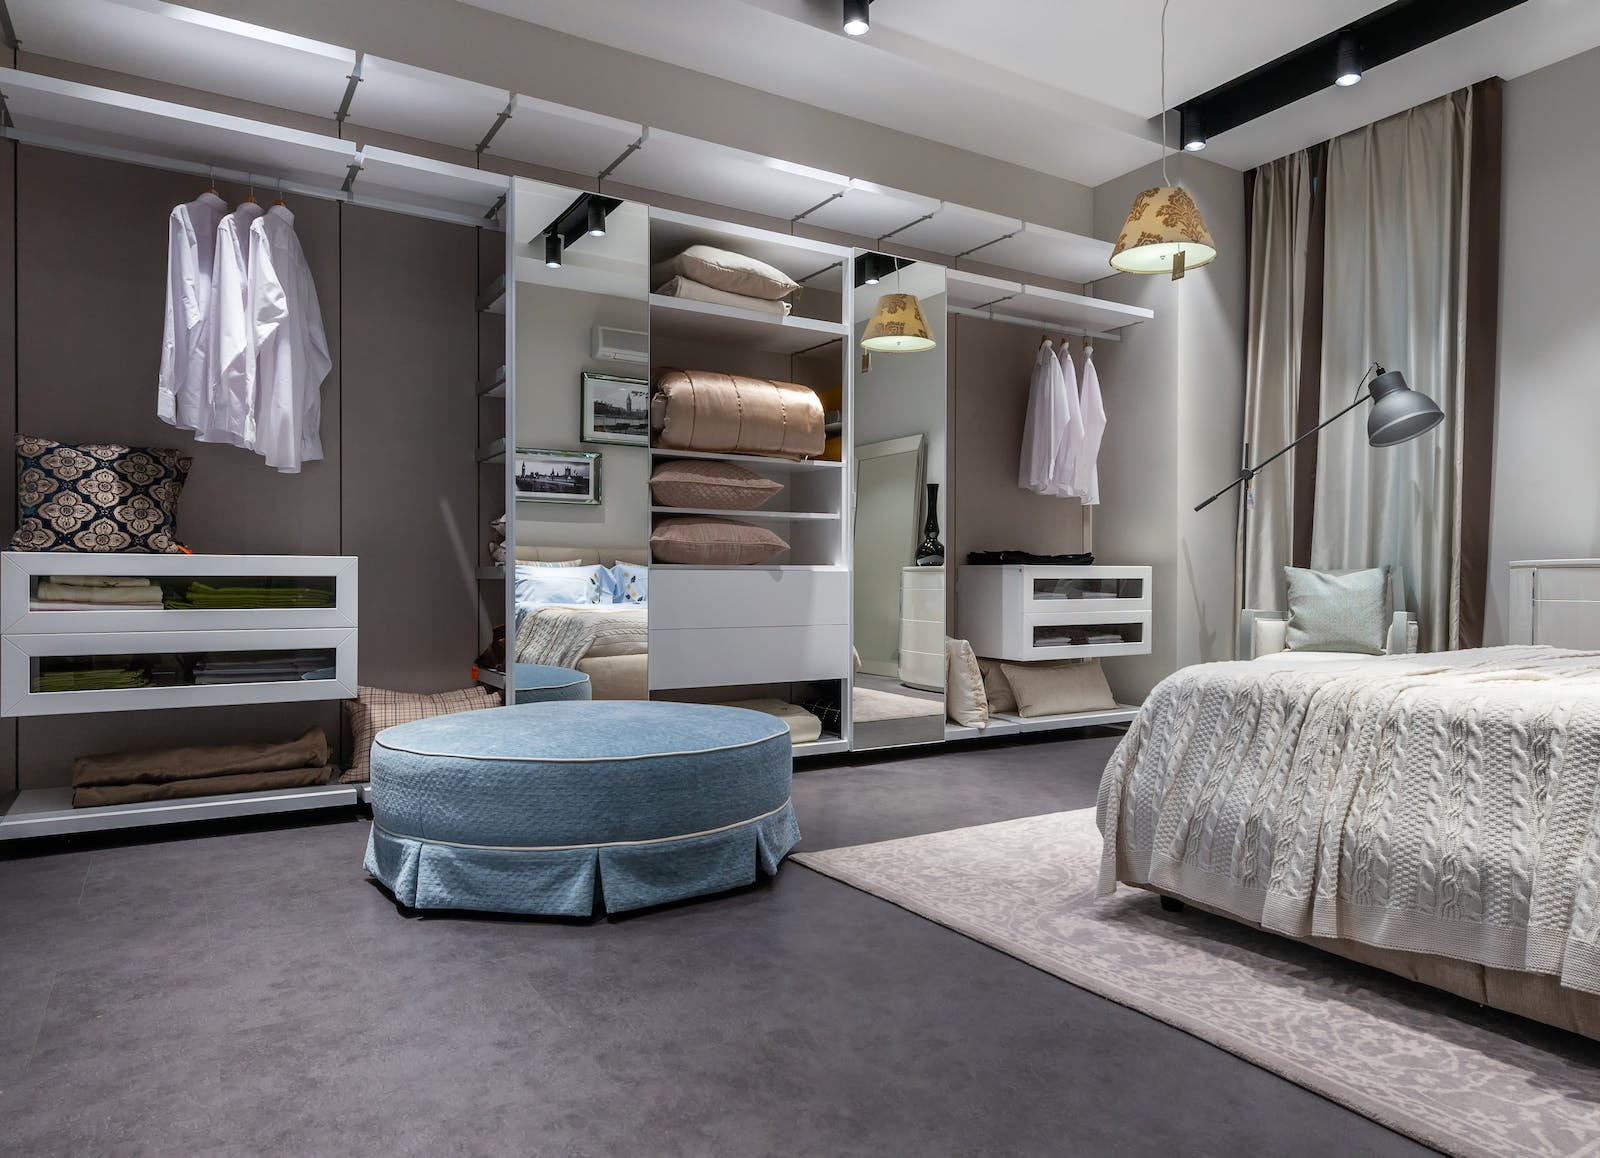 Interior of design of modern bedroom with comfortable bed carpet and built in wardrobe